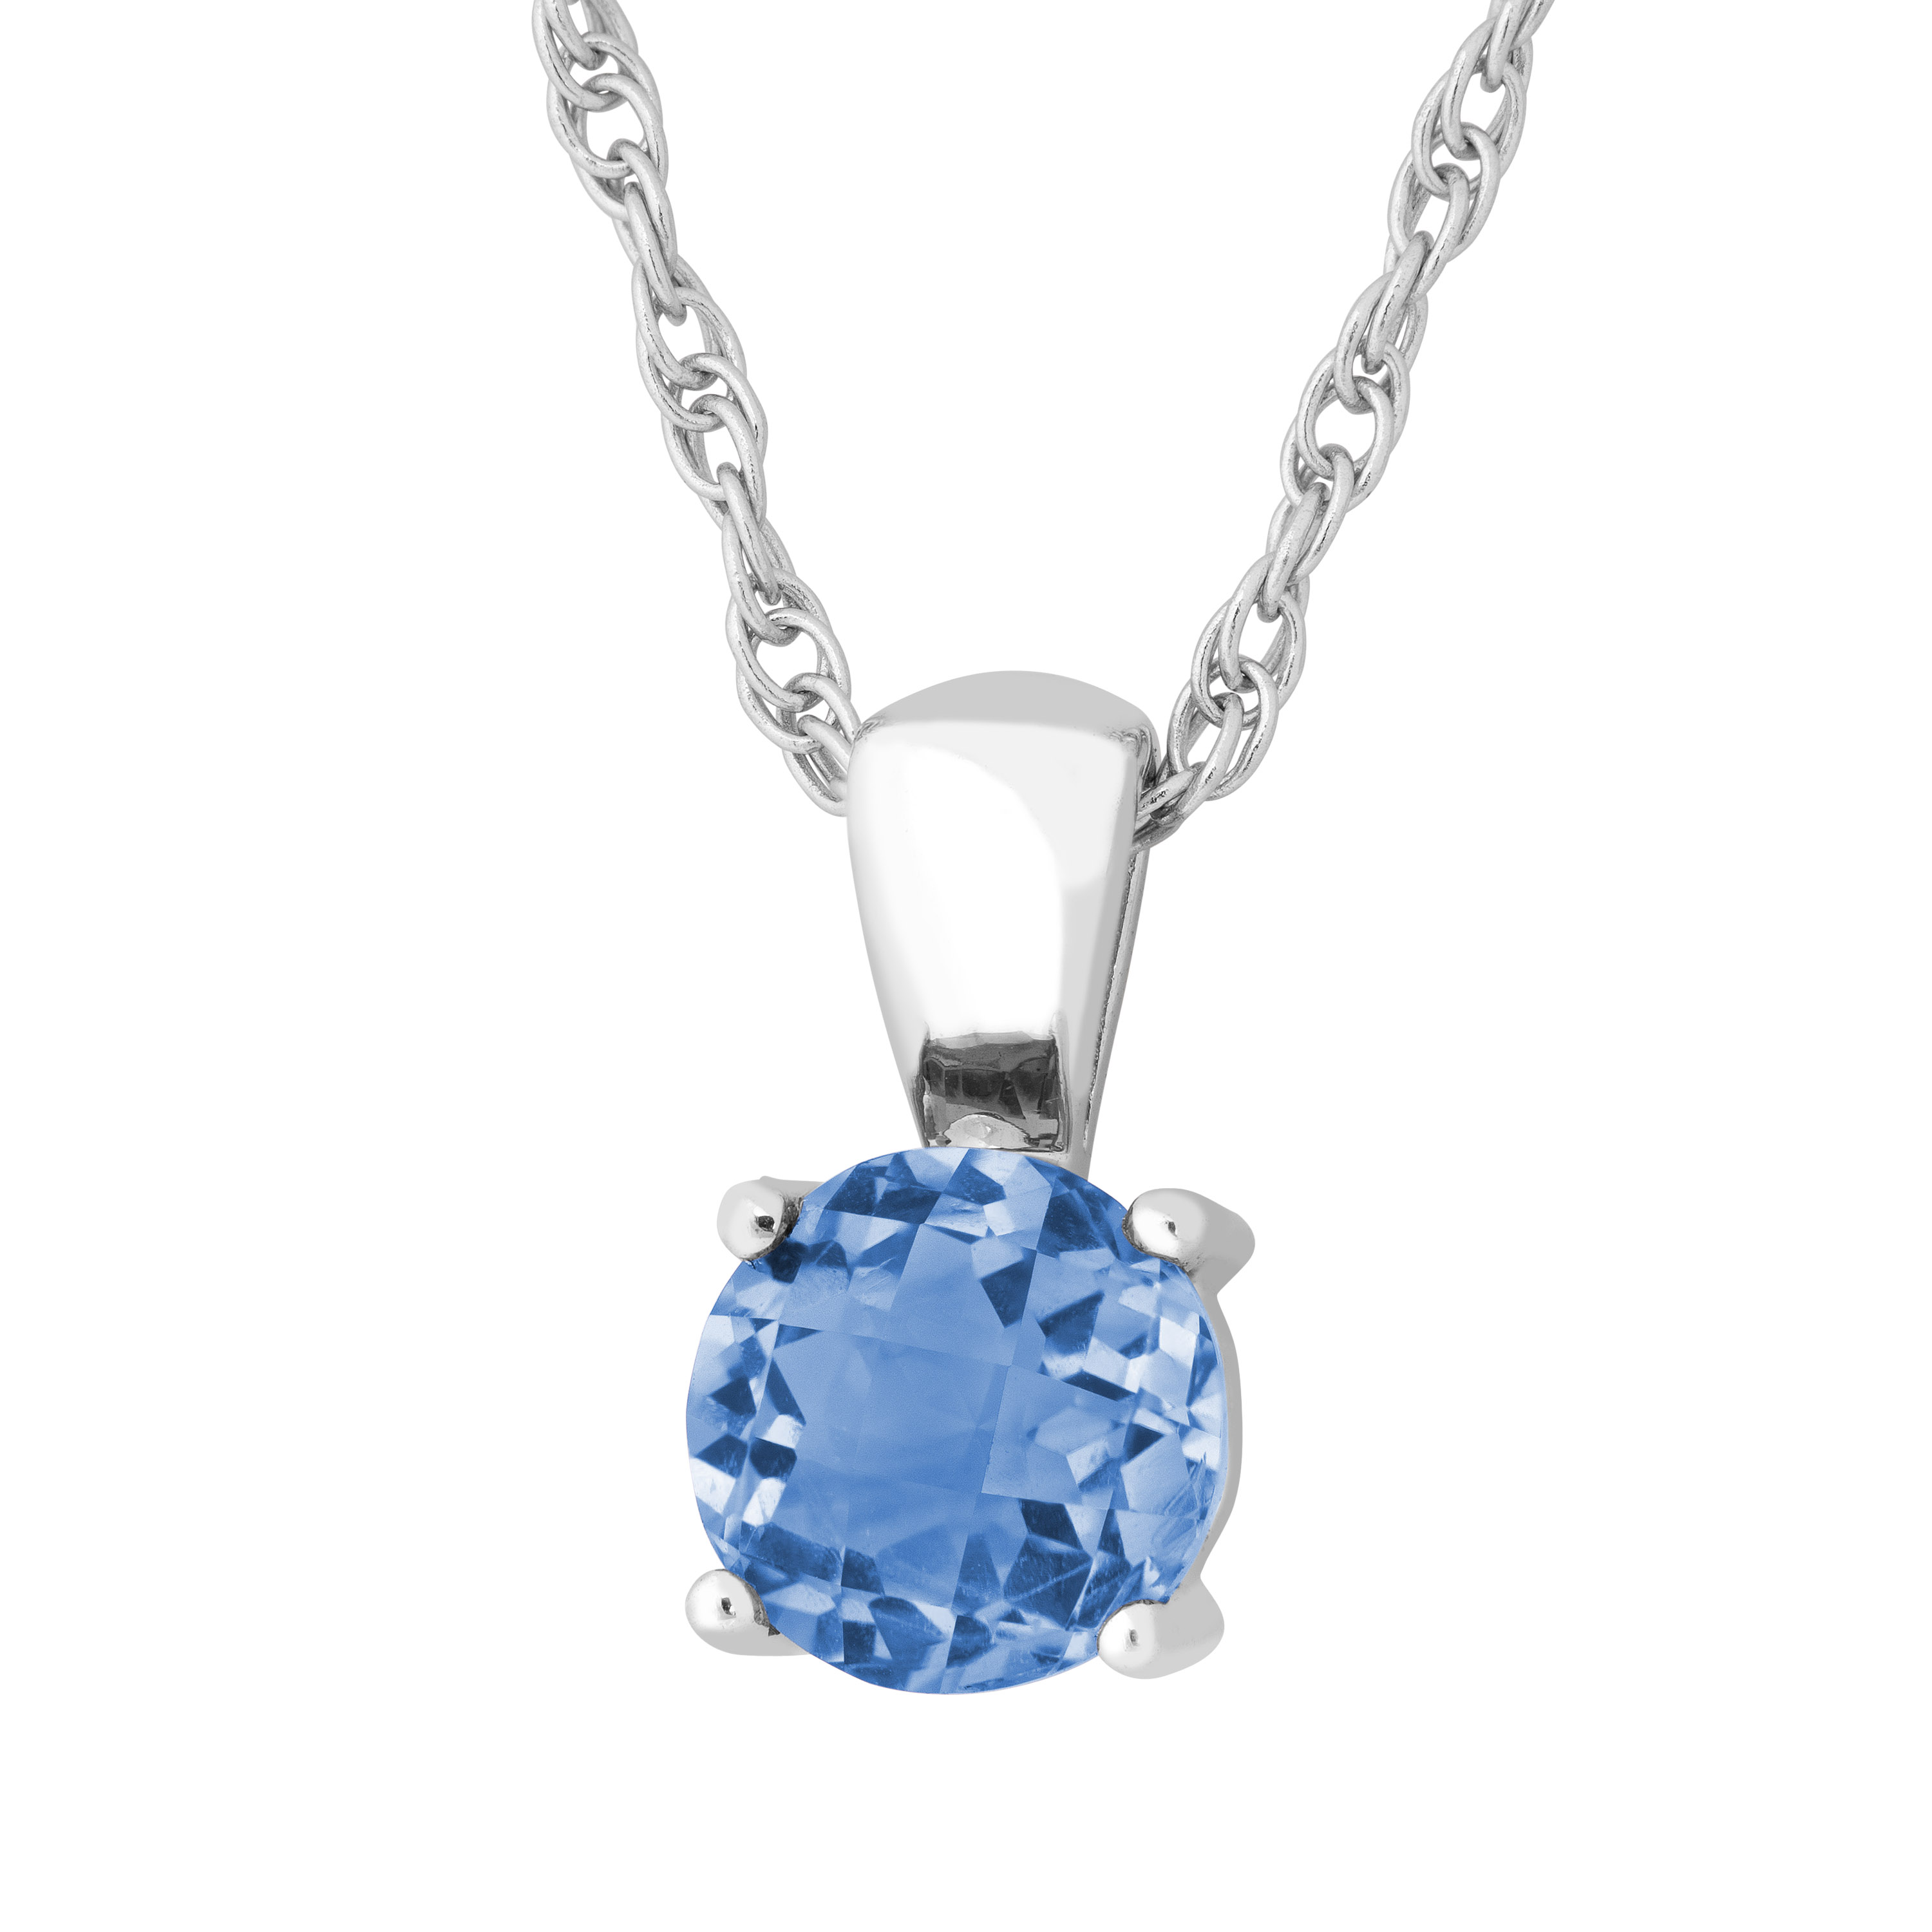 Round Swiss Blue Topaz Pendant Necklace, Rhodium Plated Sterling Silver